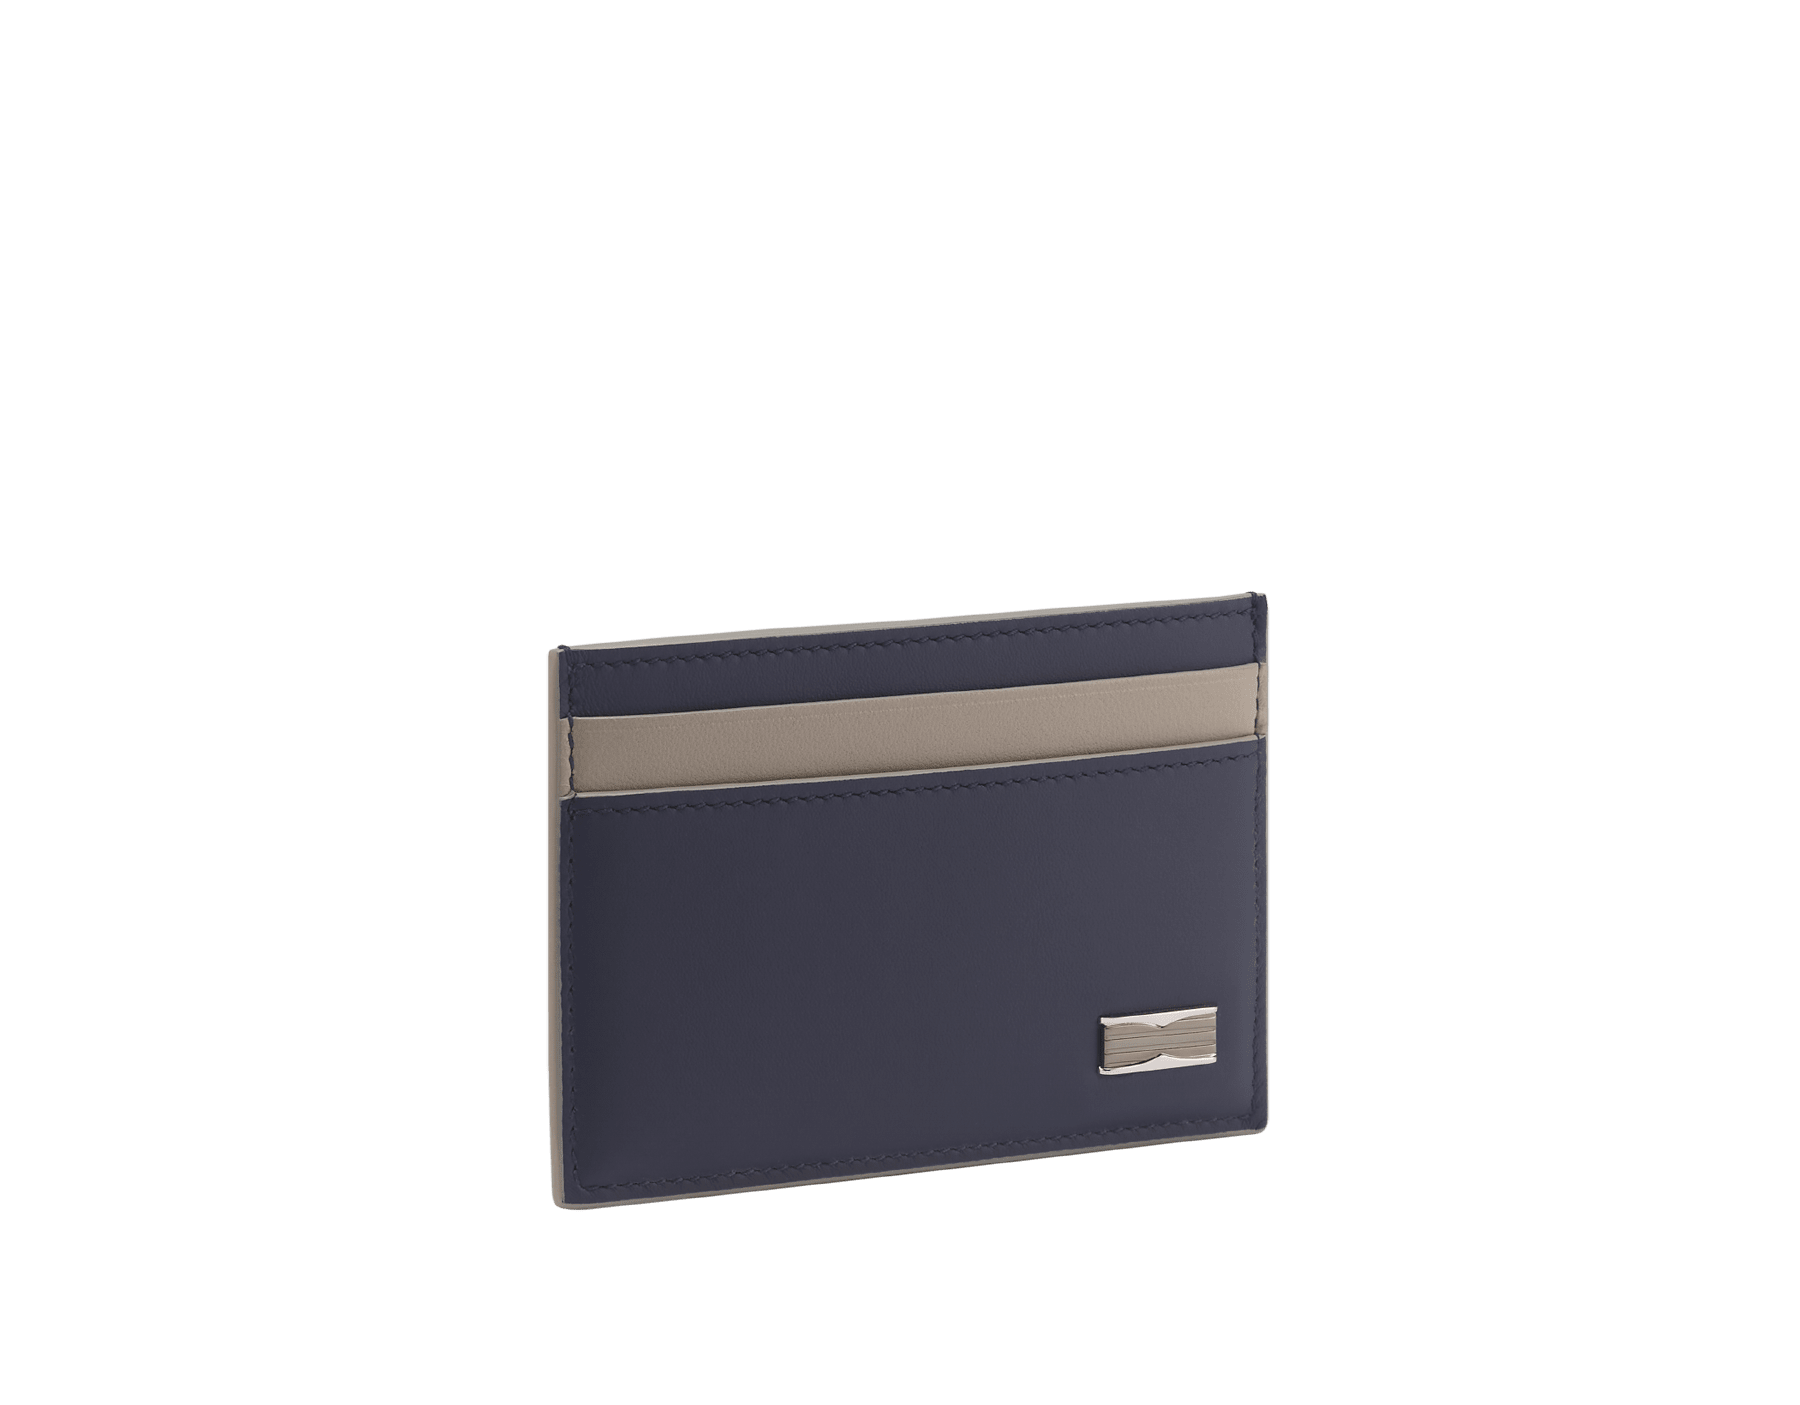 B.zero1 Man card holder in black matte calf leather with Niagara sapphire blue nappa leather detailing. Iconic dark ruthenium and palladium-plated brass embellishment. BZM-CCHOLDER image 1